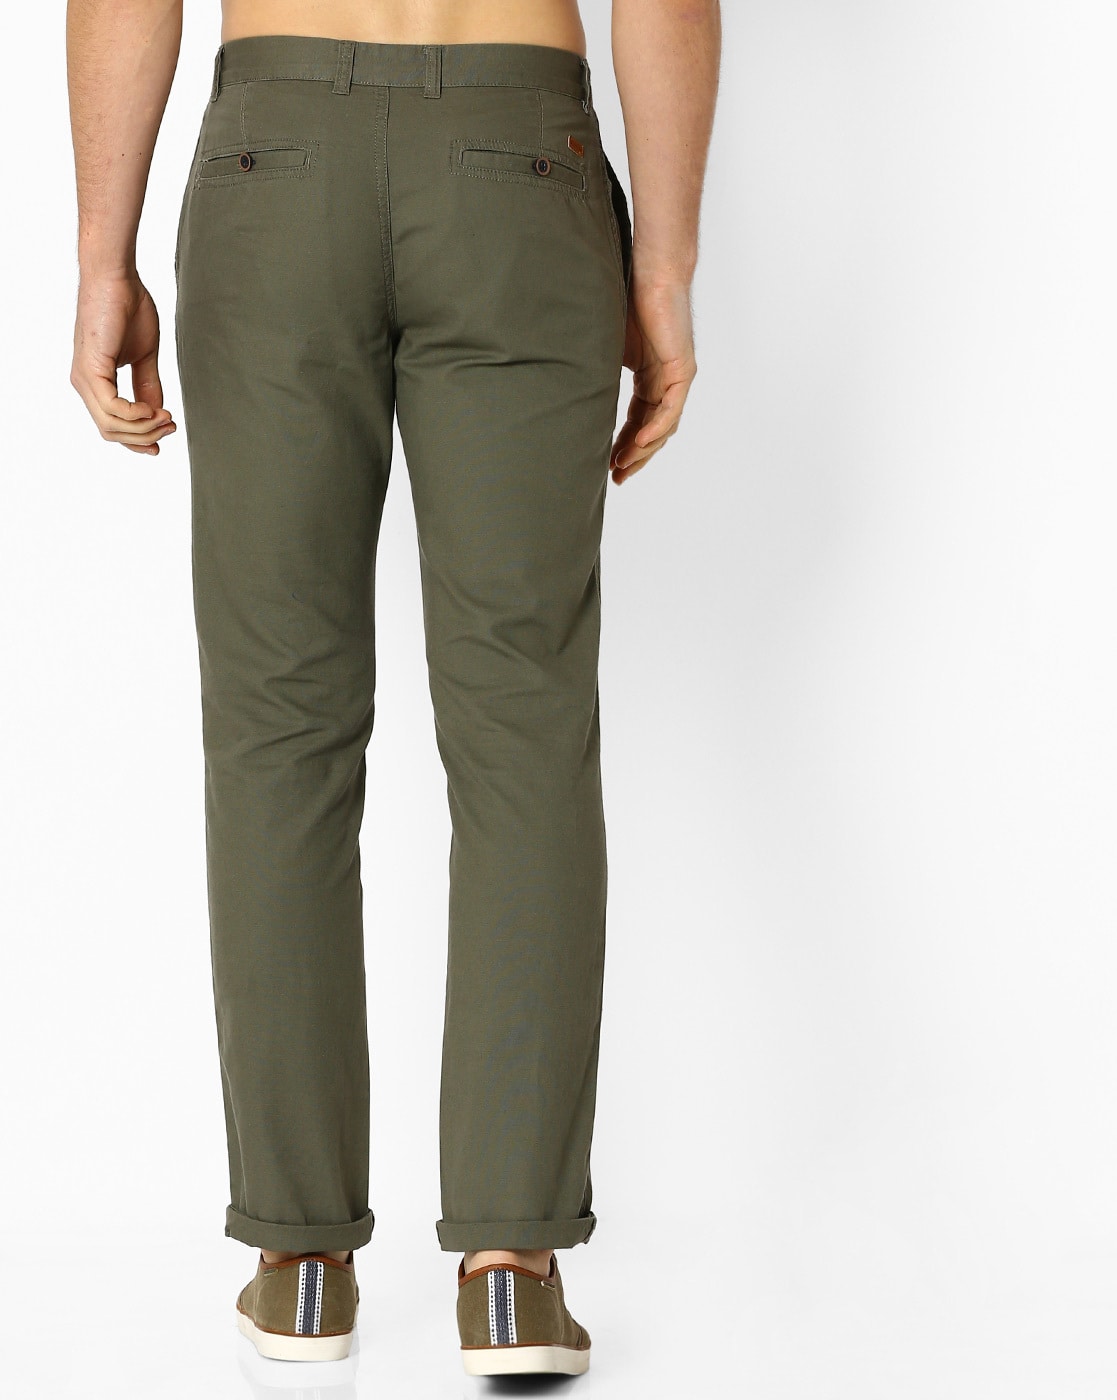 Buy Olive Green Popcorn Textured Straight Fit Pant - Tistabene